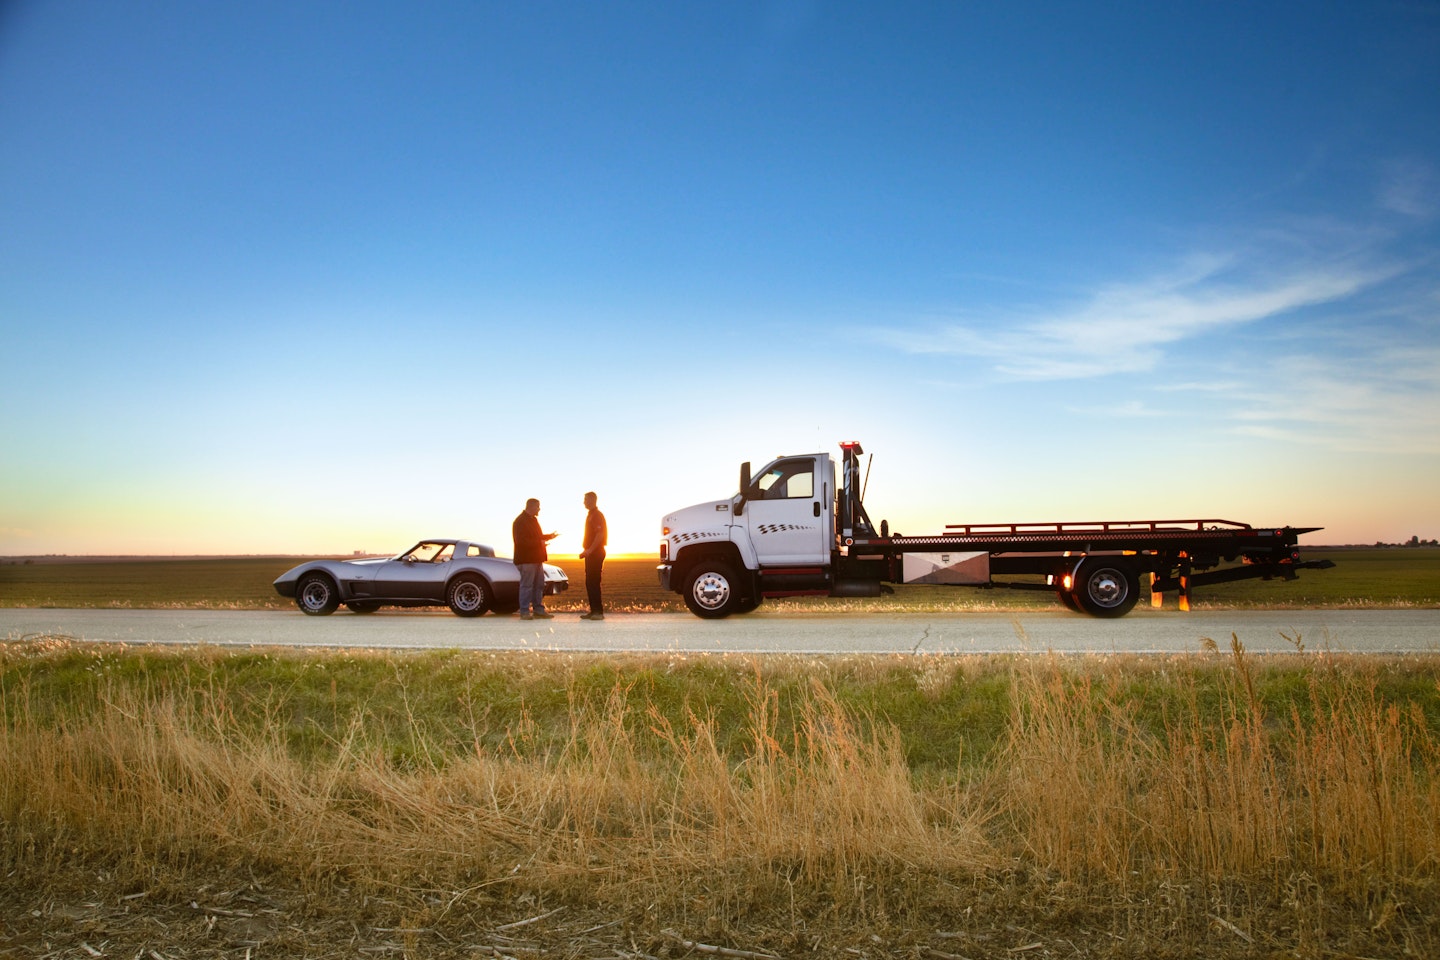 classic car being towed on rural road at dusk